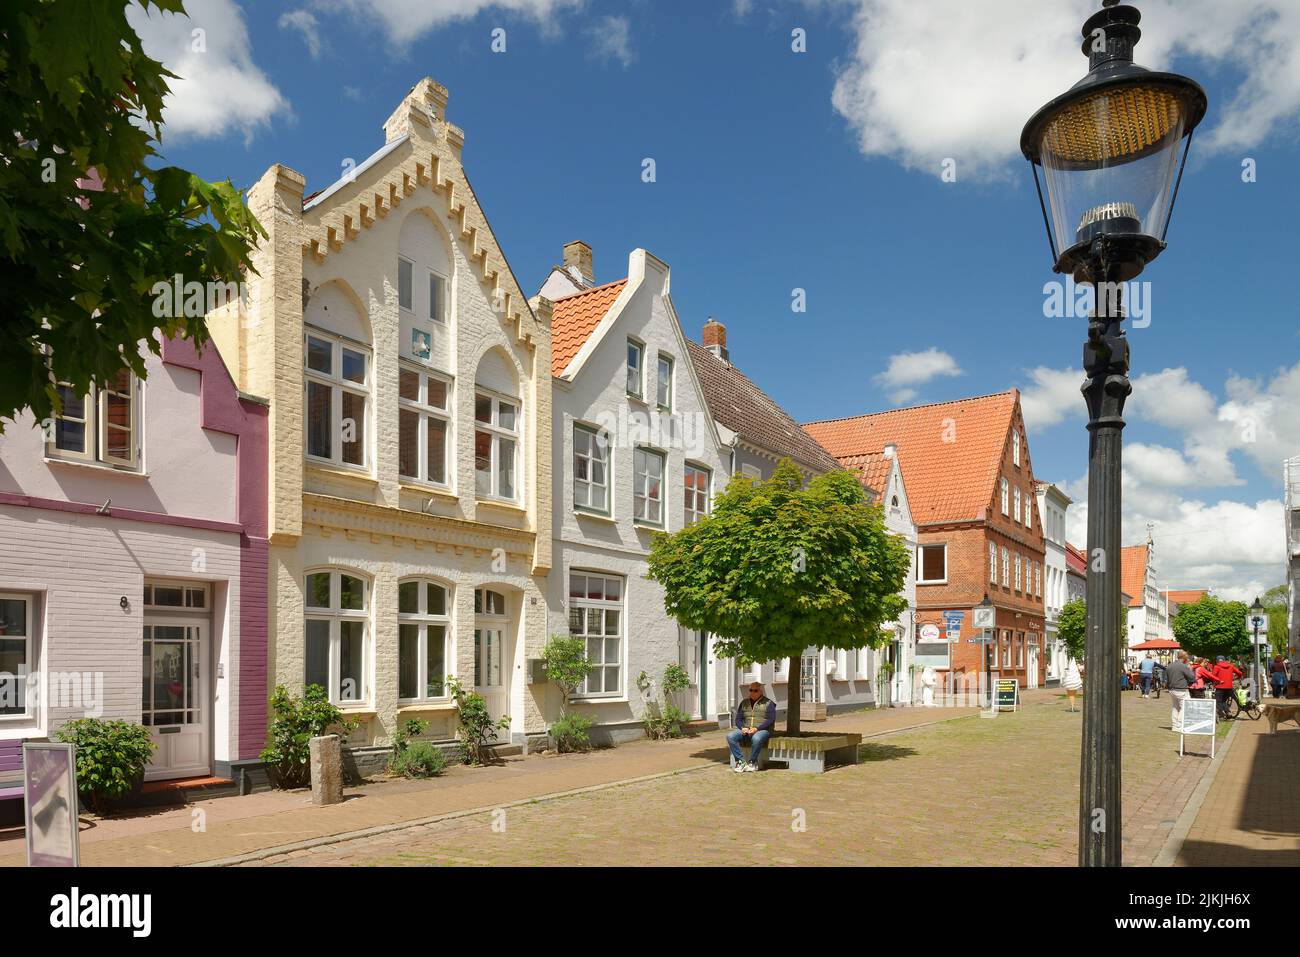 Town houses in the Prinzenstraße of Friedrichstadt, the Dutch town on the Eiderstedt peninsula, North Frisia, Eiderstedt peninsula, Schleswig-Holstein, Germany Stock Photo